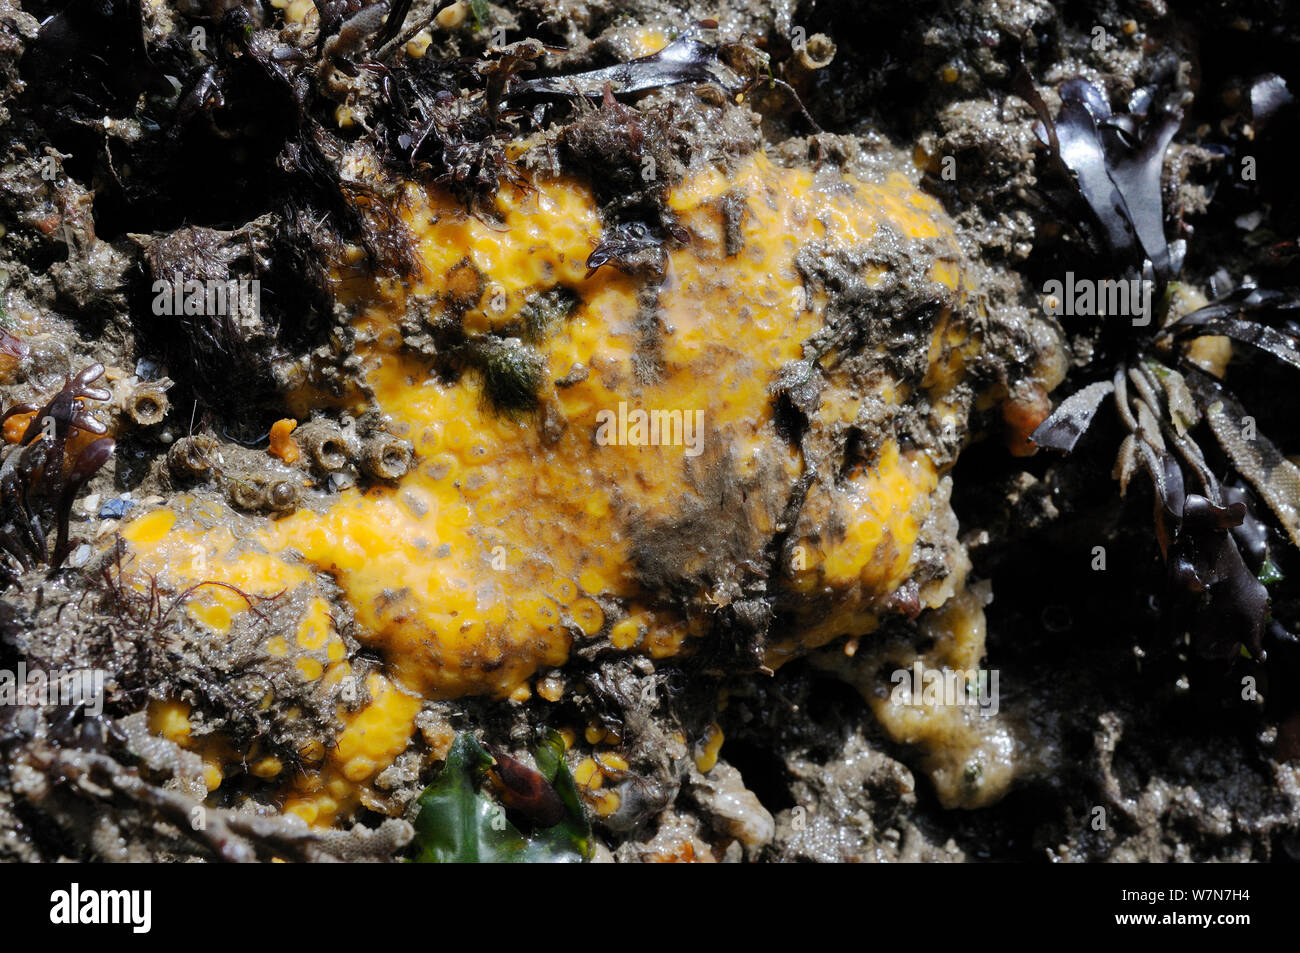 Yellow boring sponge (Cliona celata) and Ross worm tubes (Sabellaria spinulosa) on limestone rocks exposed on a low spring tide. Rhossili, The Gower peninsula, UK, July. Stock Photo